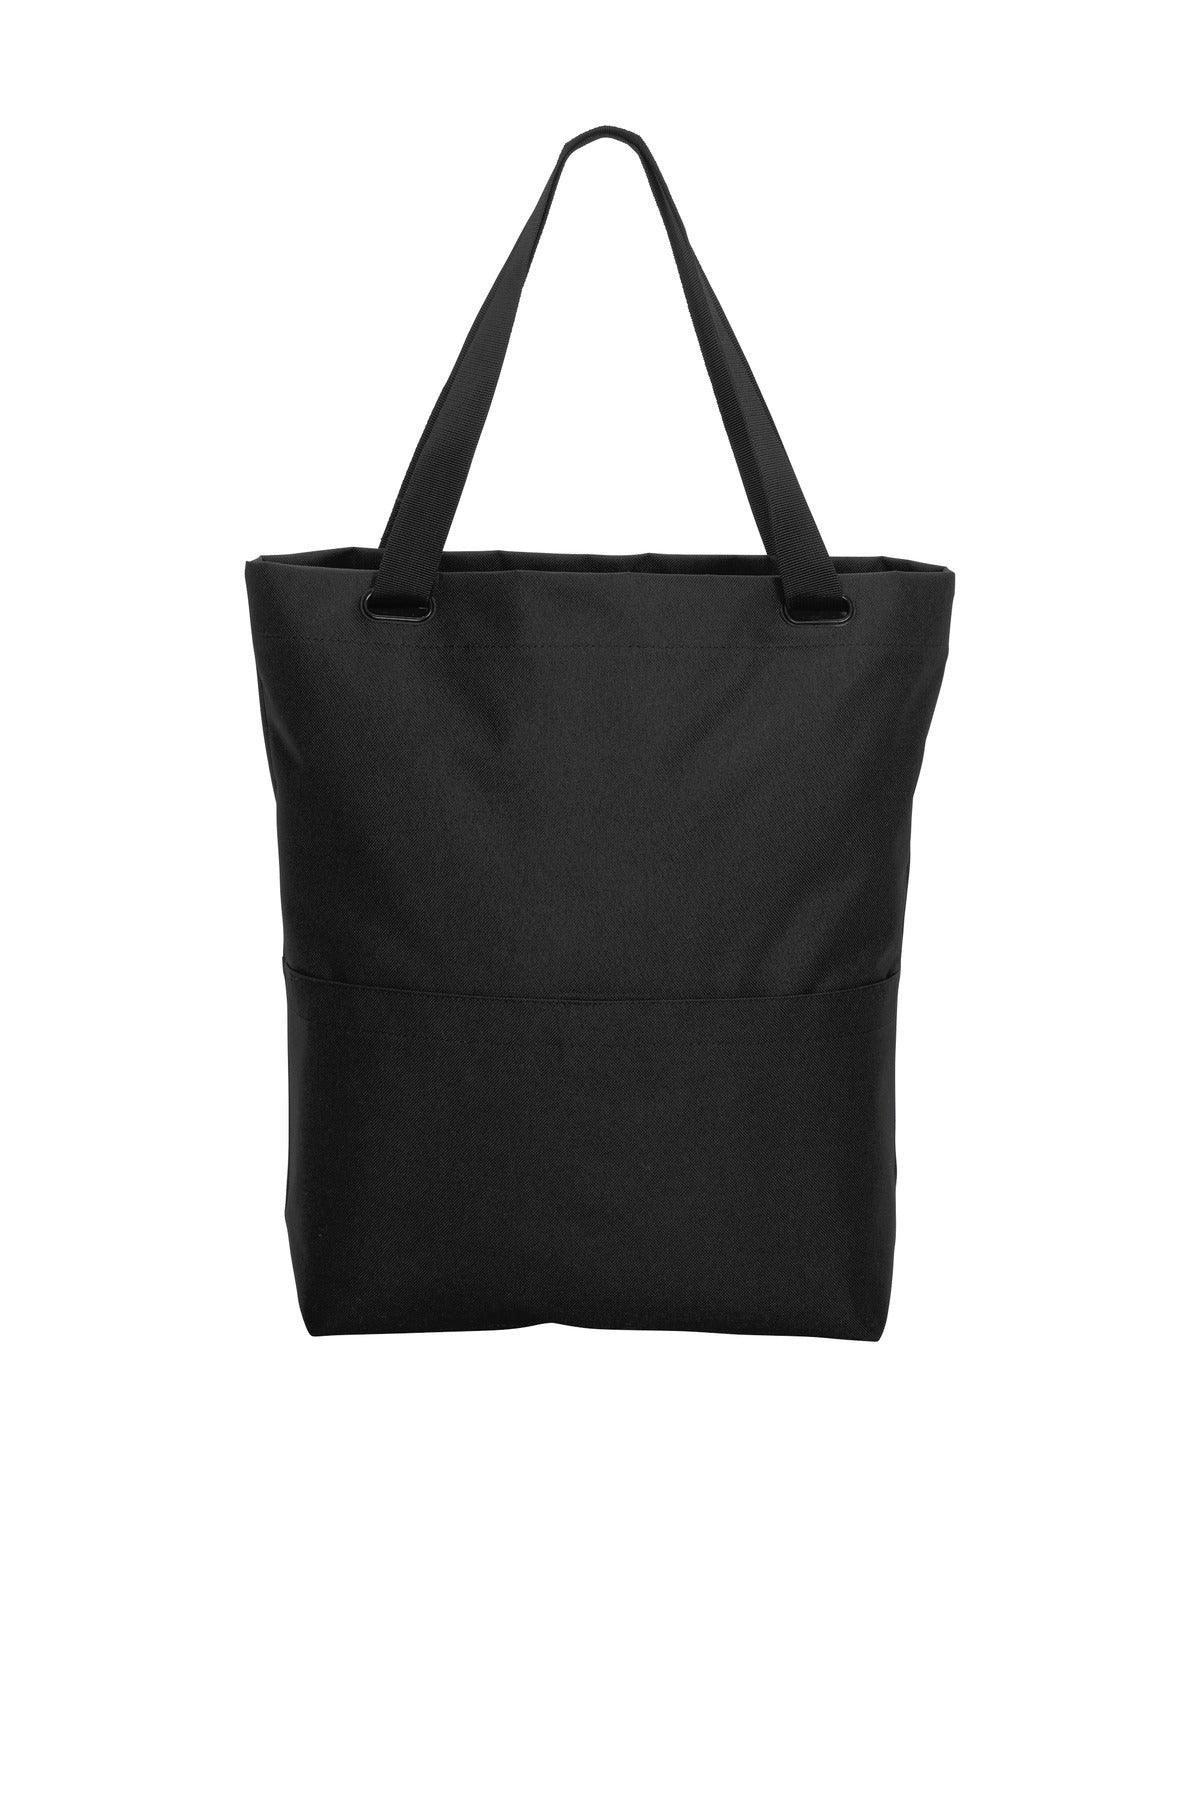 Port Authority Access Convertible Tote. BG418 - Dresses Max